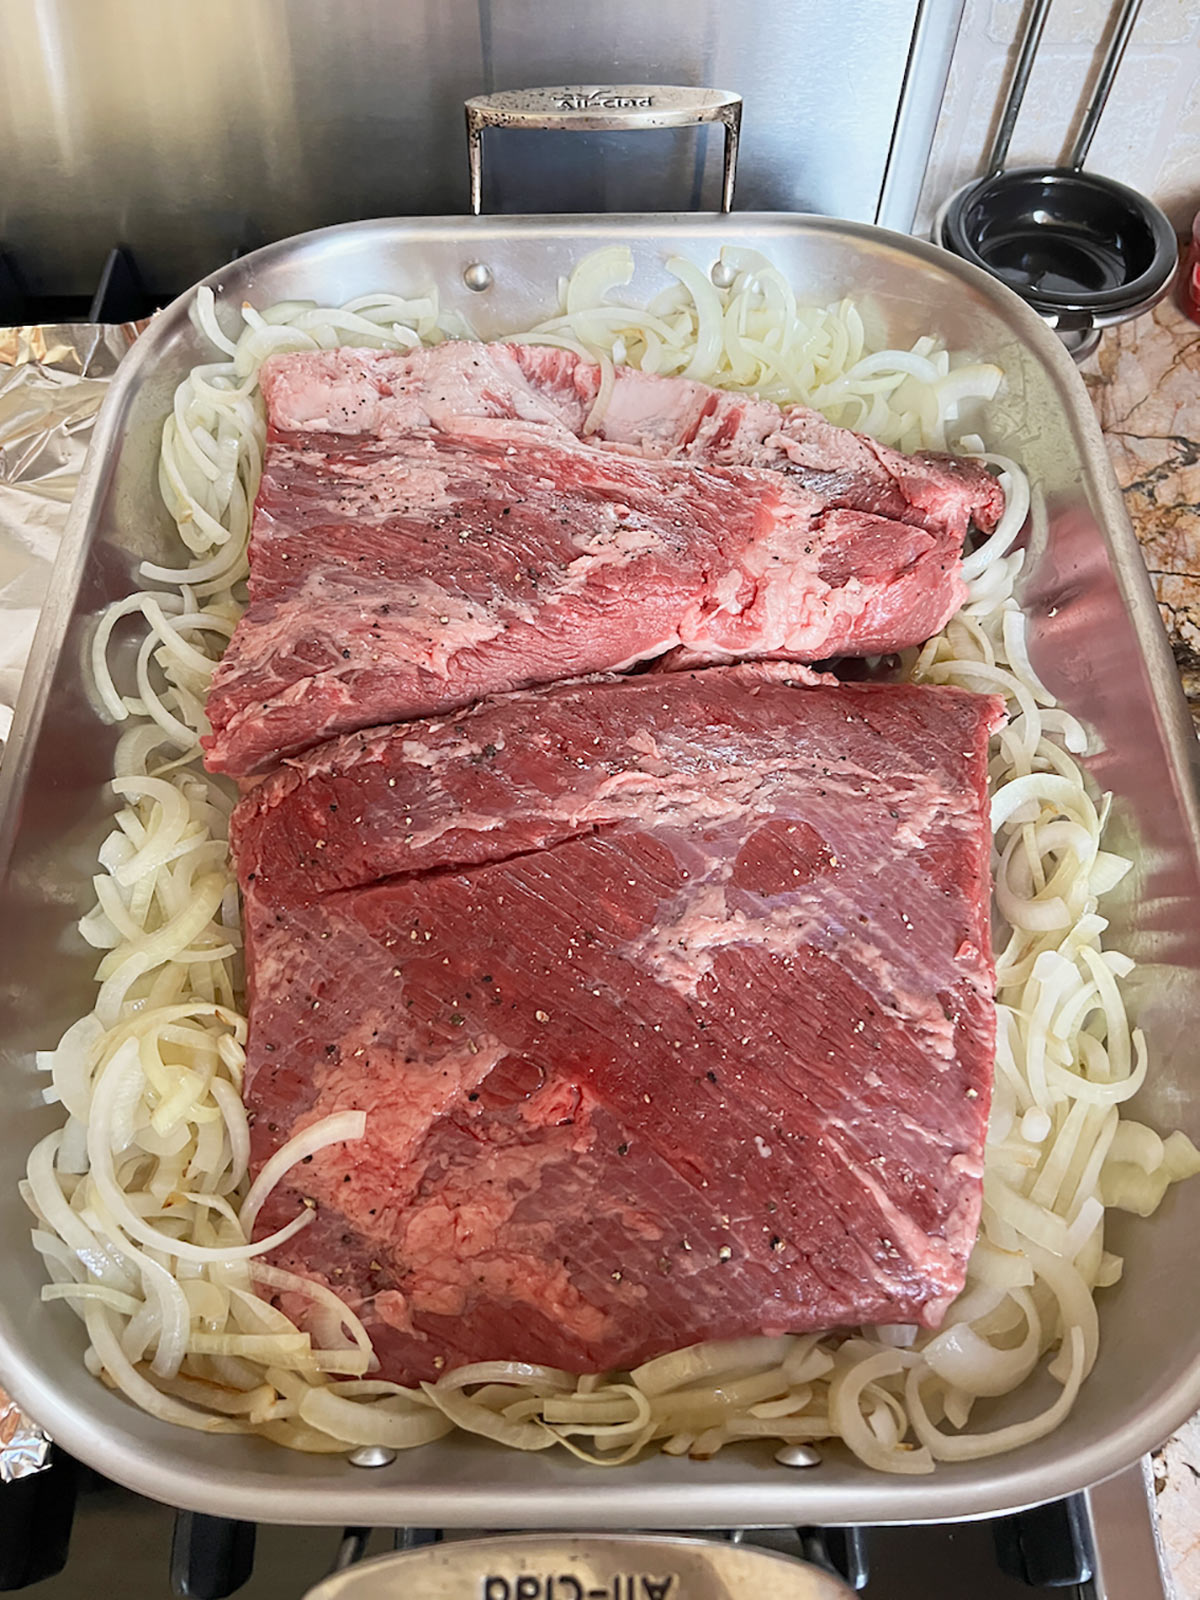 Brisket placed in large roasting pan with the onions pushed to the side.